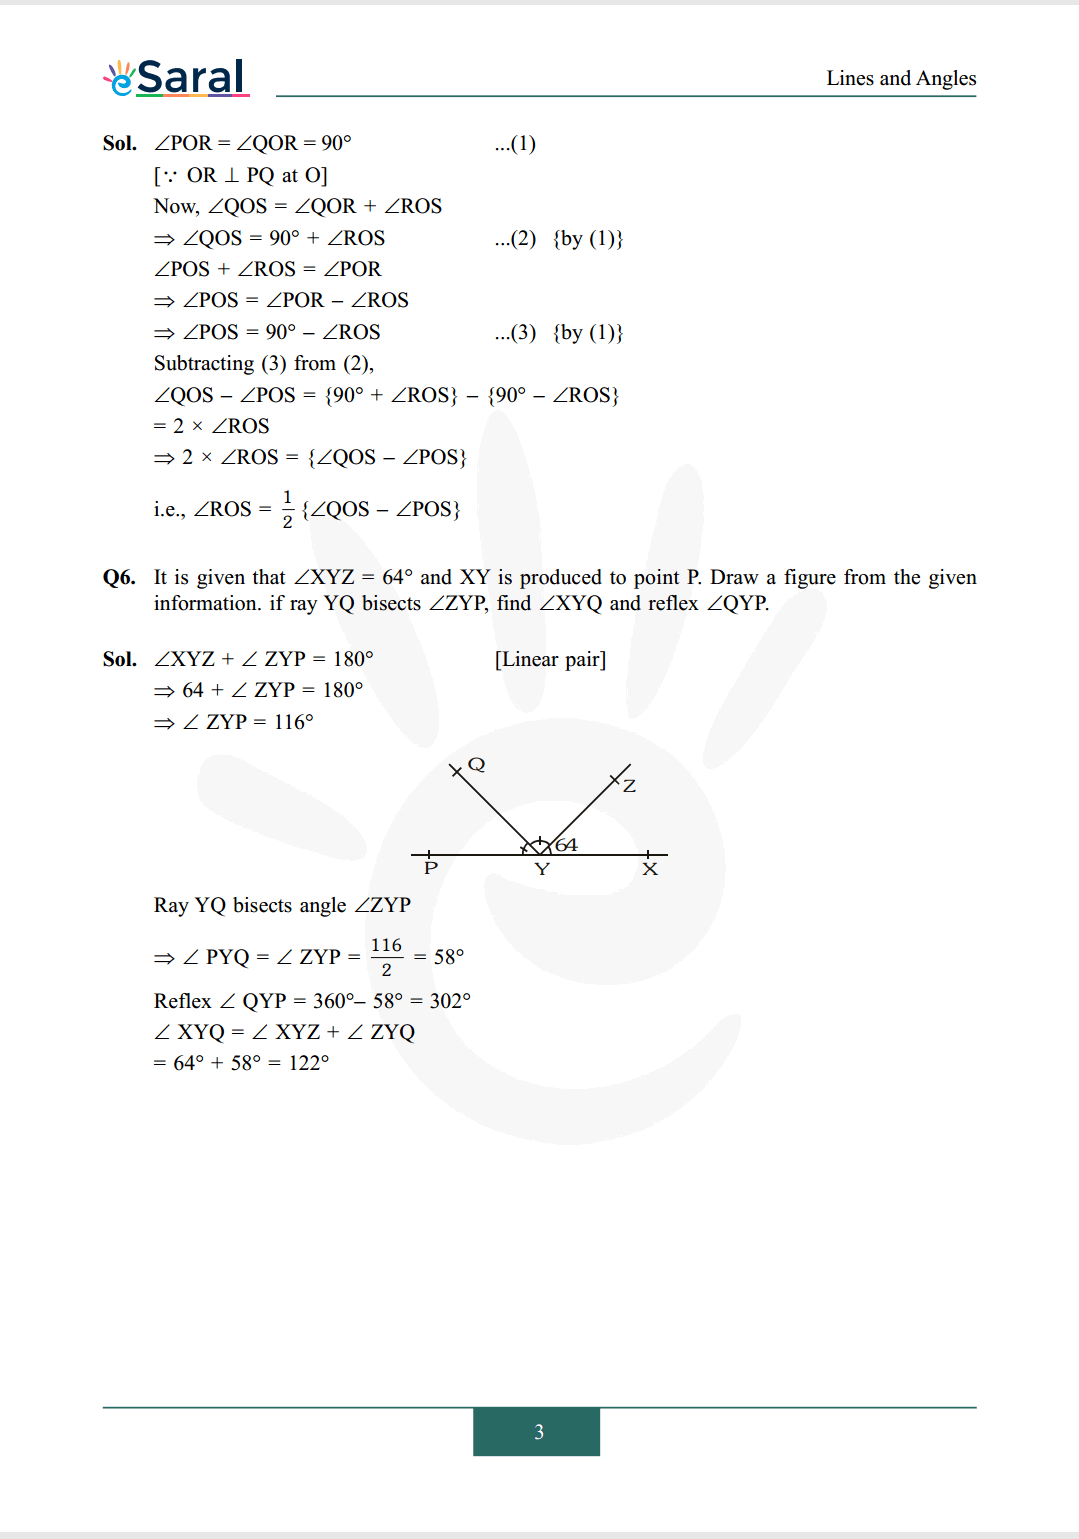 Class 9 maths chapter 6 exercise 6.1 solutions Image 3